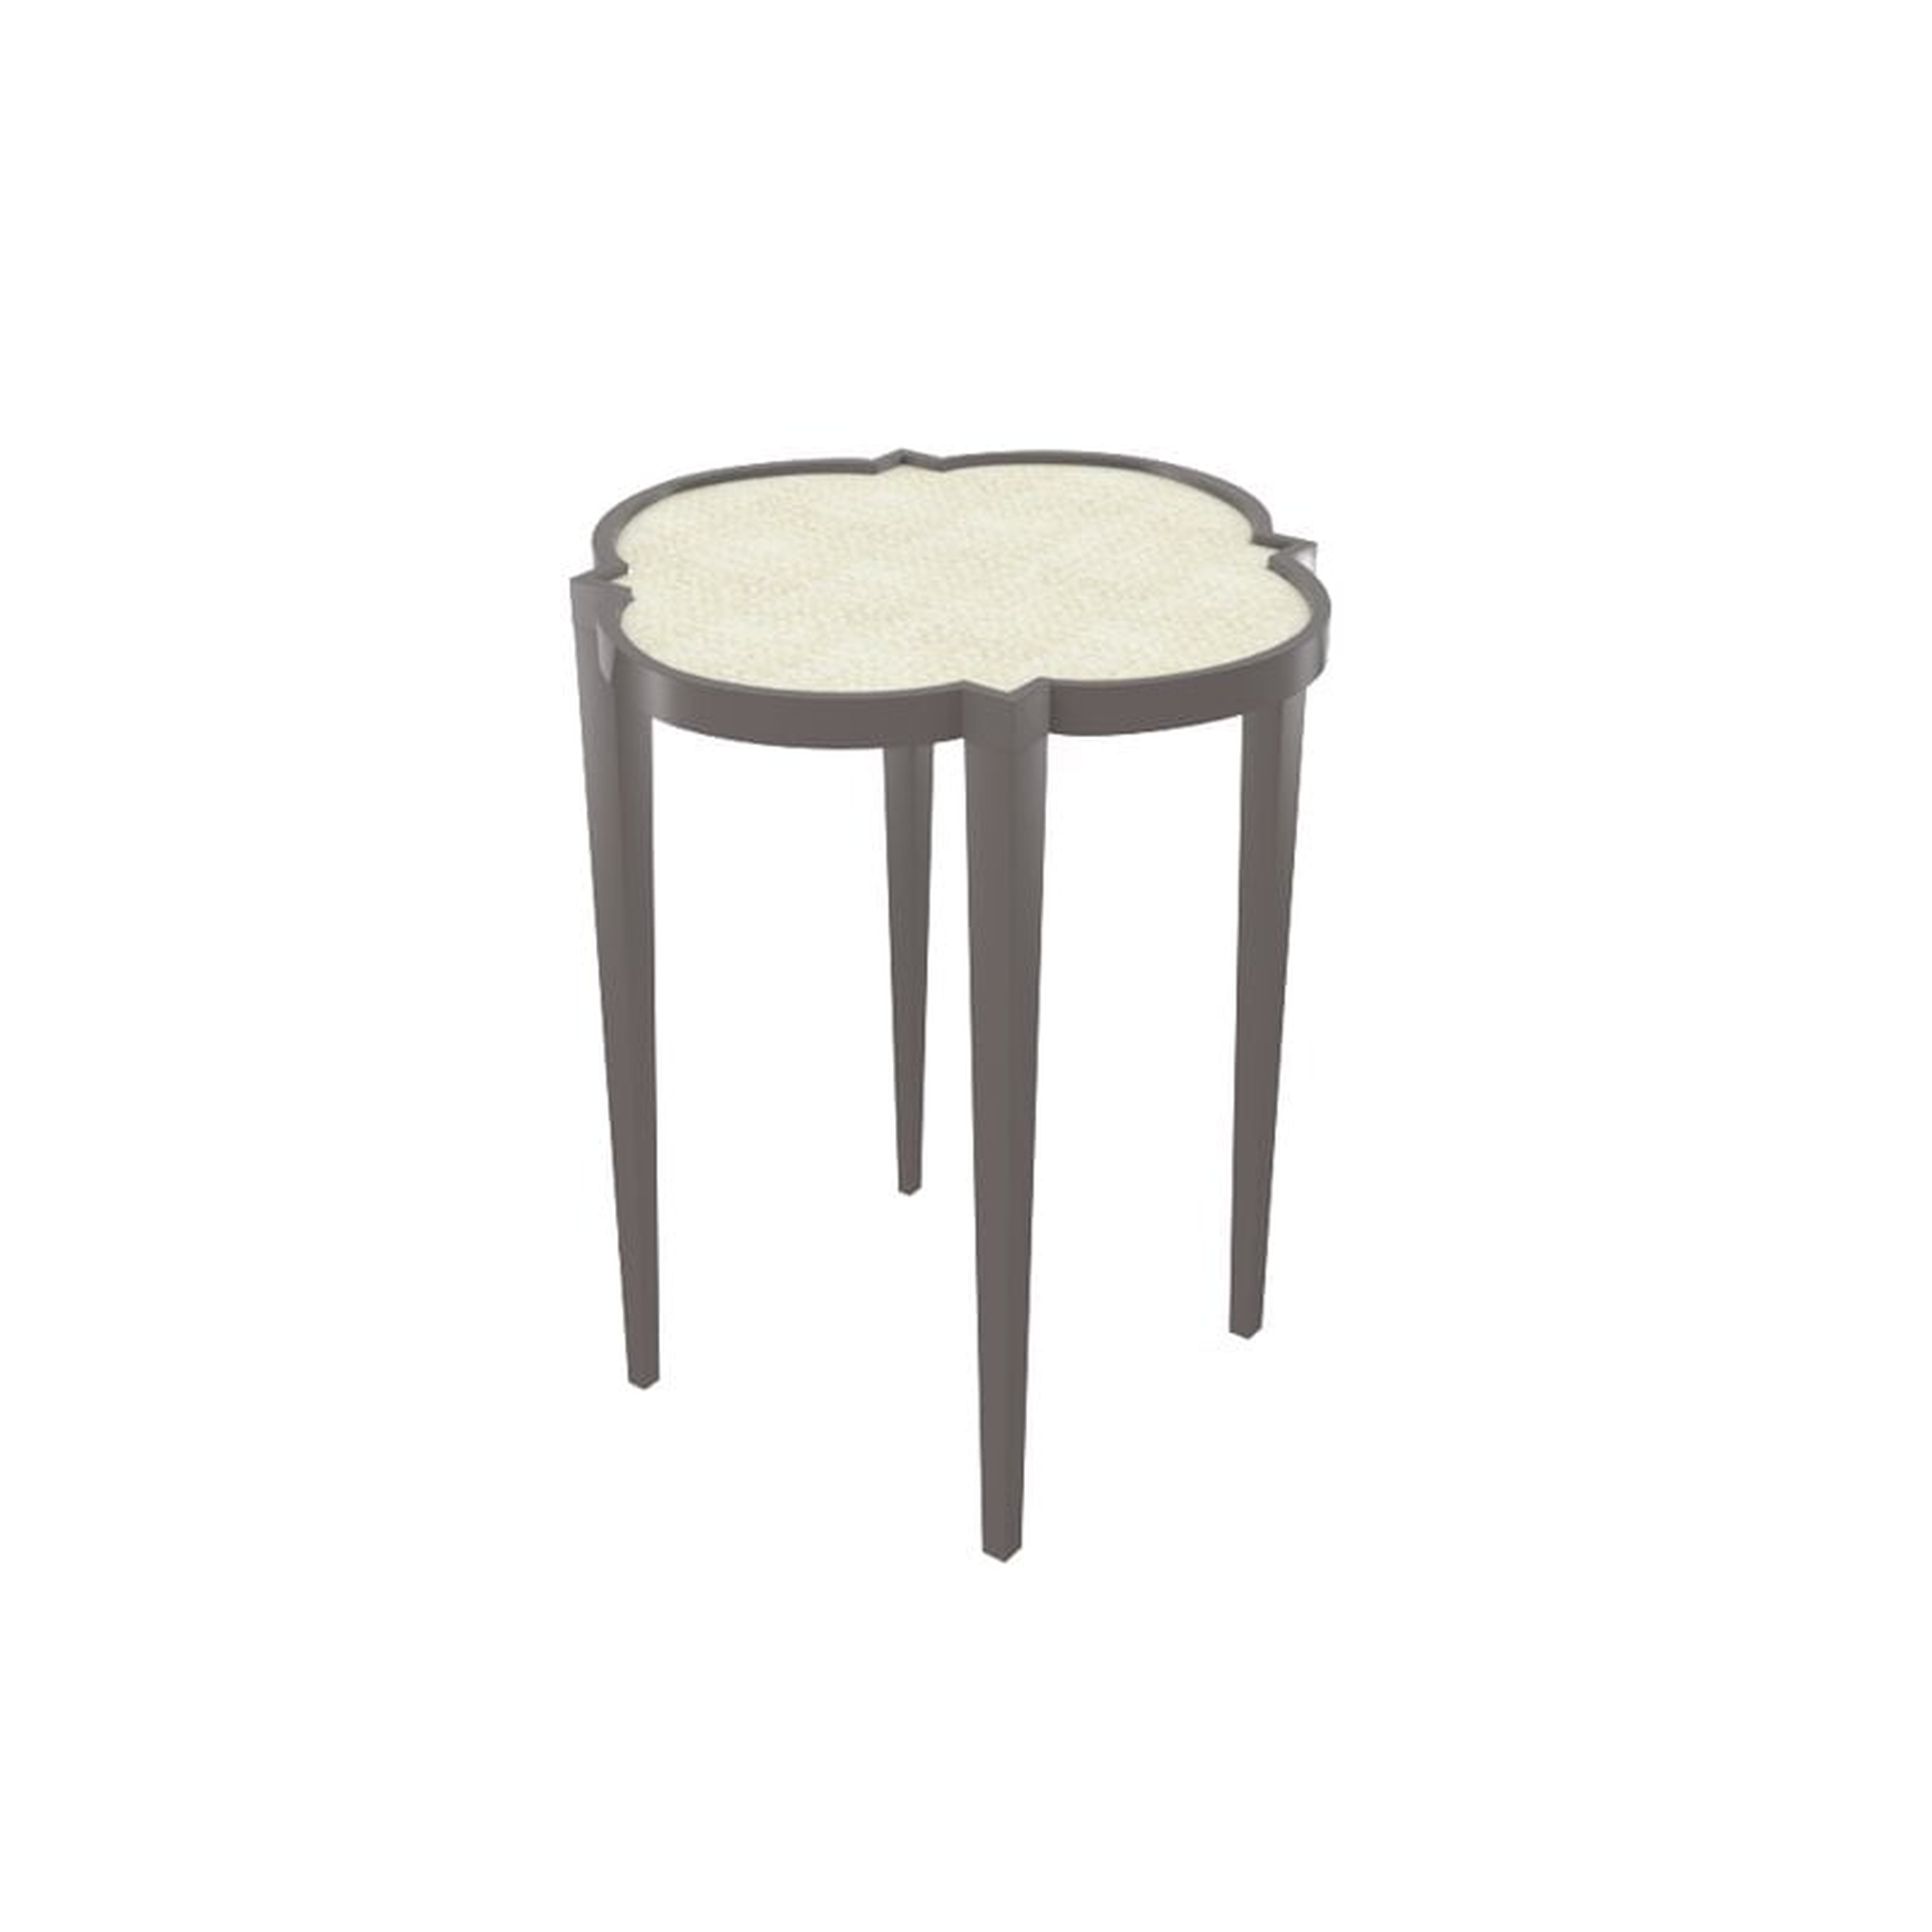 Oomph Tini IV End Table Table Base Color: Fawn Brindle, Table Top Color: Whitewashed Raffia - Perigold